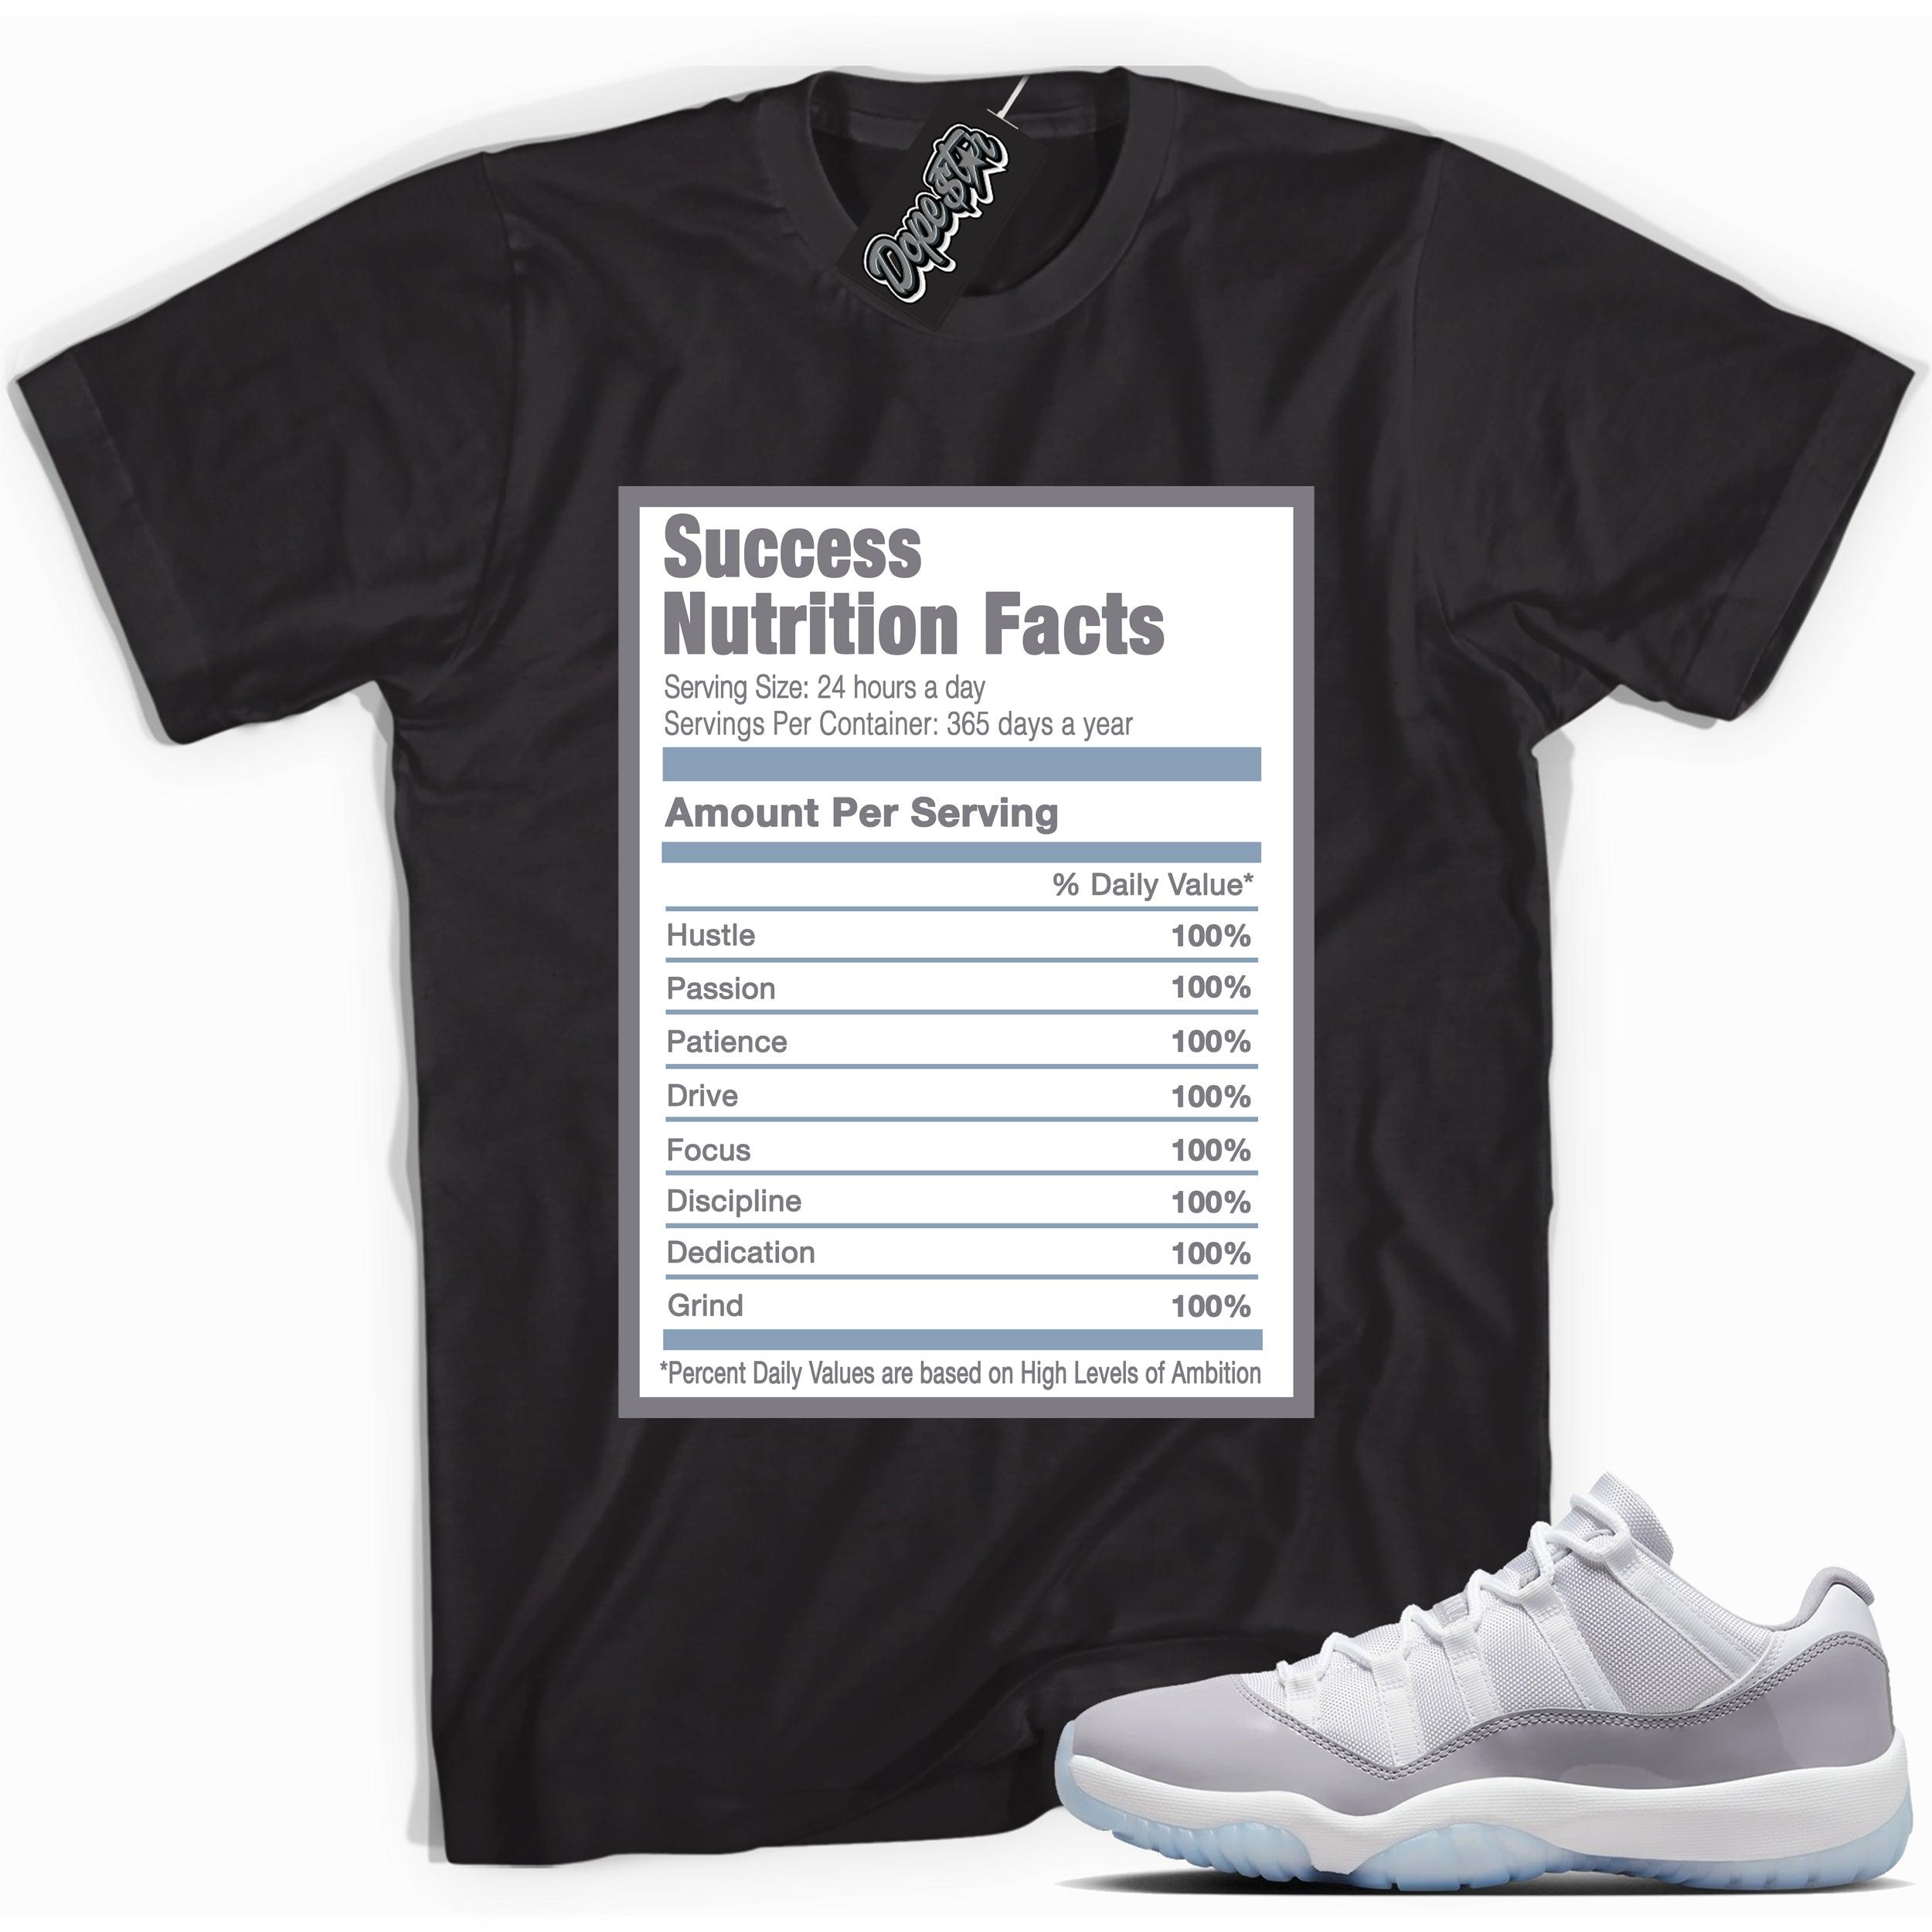 Cool Black graphic tee with “ Success Nutrition ” print, that perfectly matches Air Jordan 11 Retro Low Cement Grey sneakers 